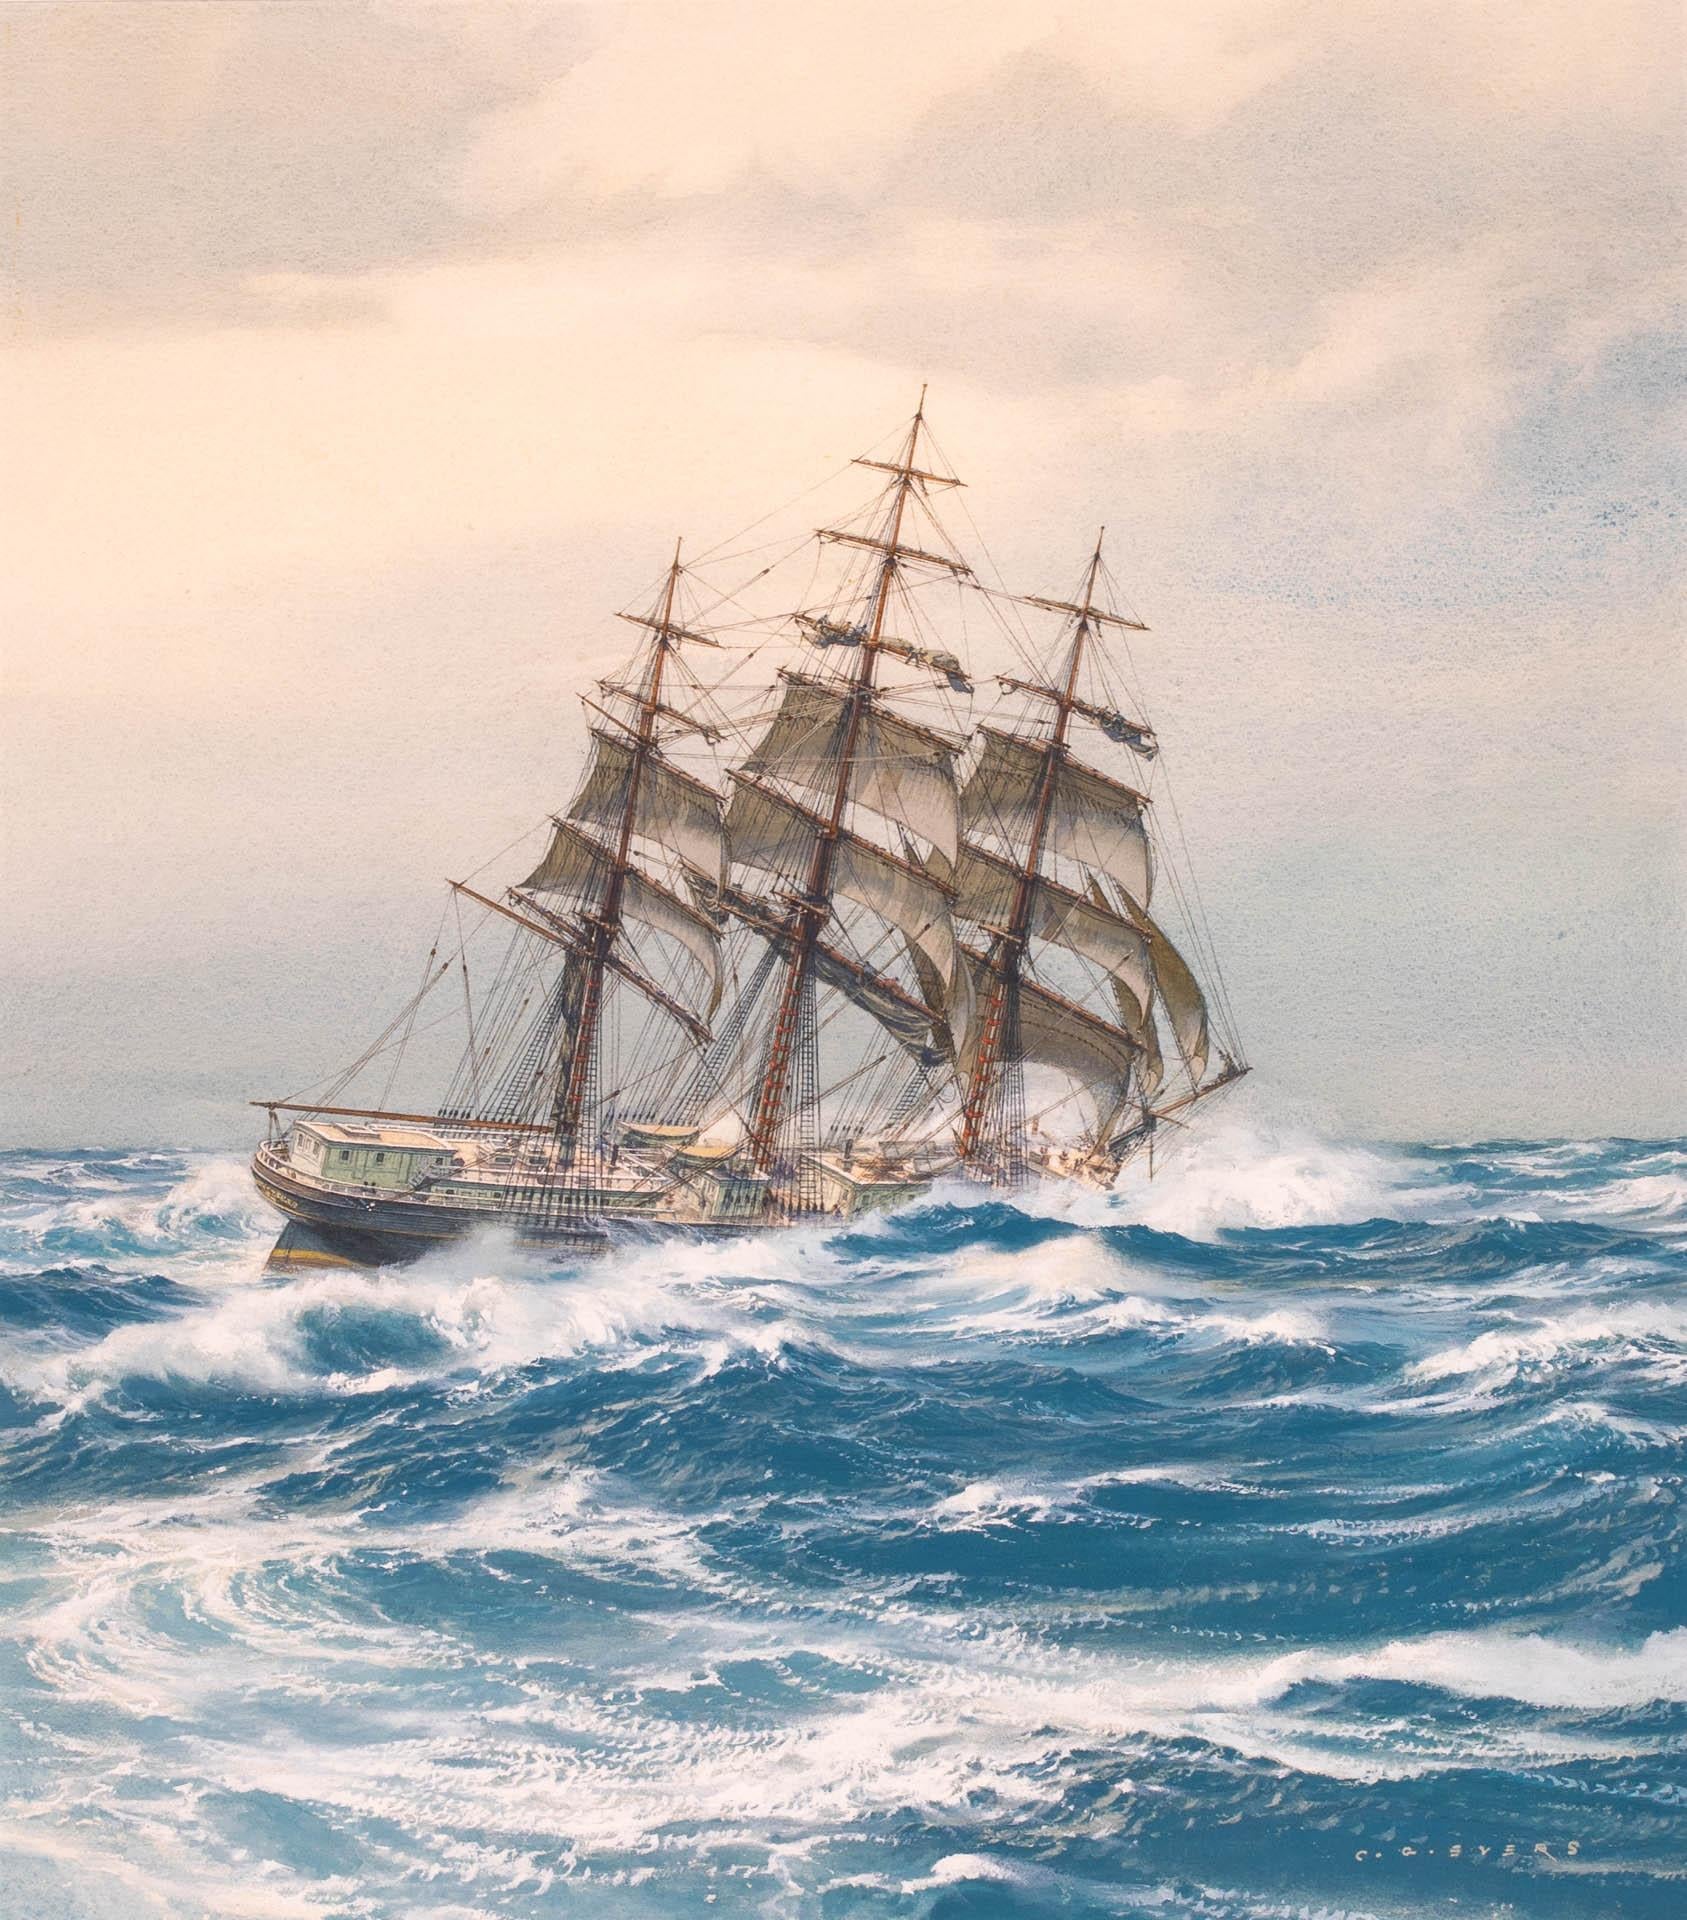 Ship GLORY OF THE SEAS - Painting by Carl Evers